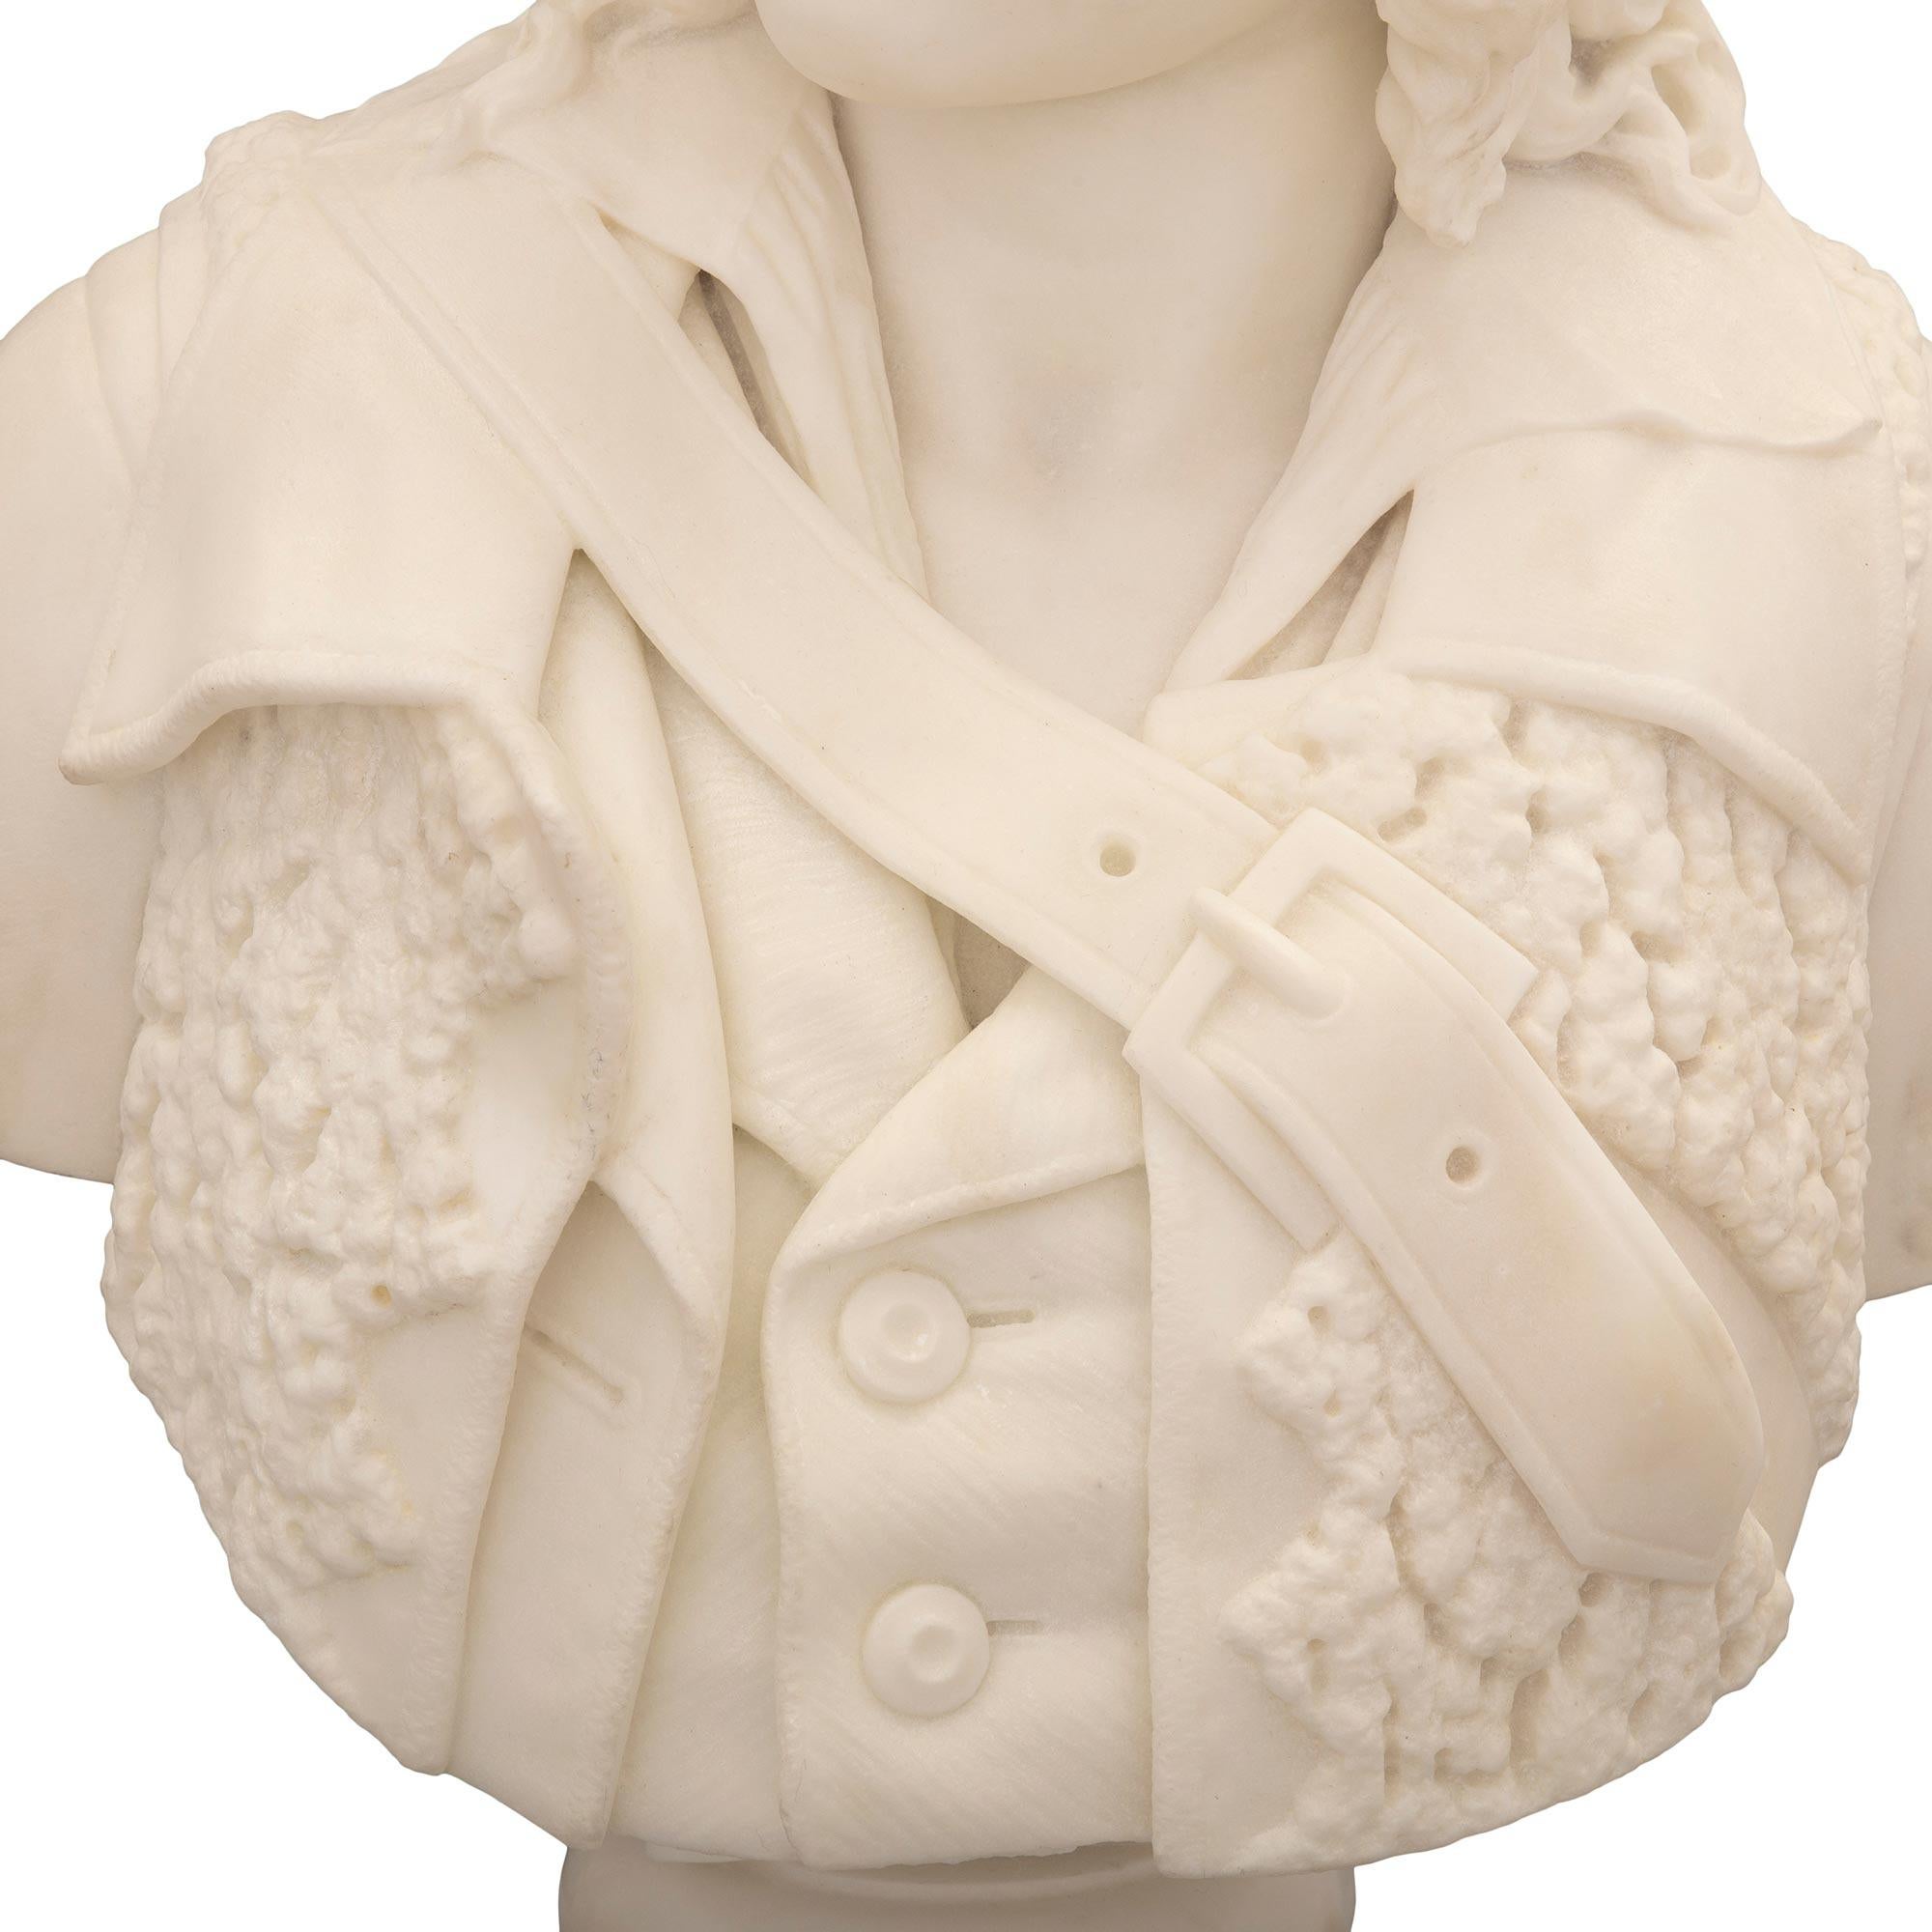 Italian 19th Century White Carrara Marble Bust of a Handsome Young Messenger For Sale 5